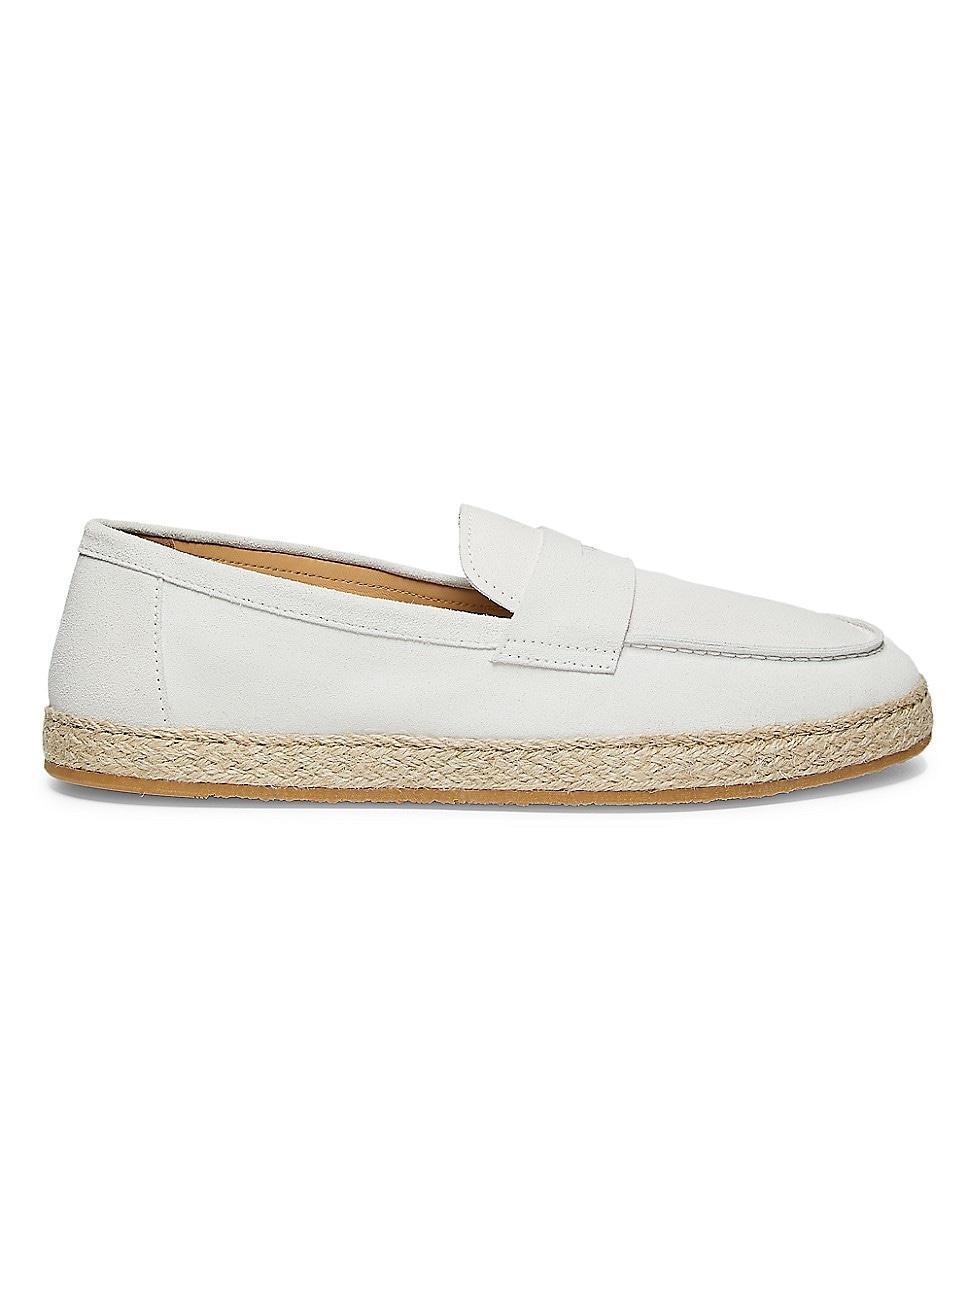 Mens Suede Espadrille Loafers Product Image